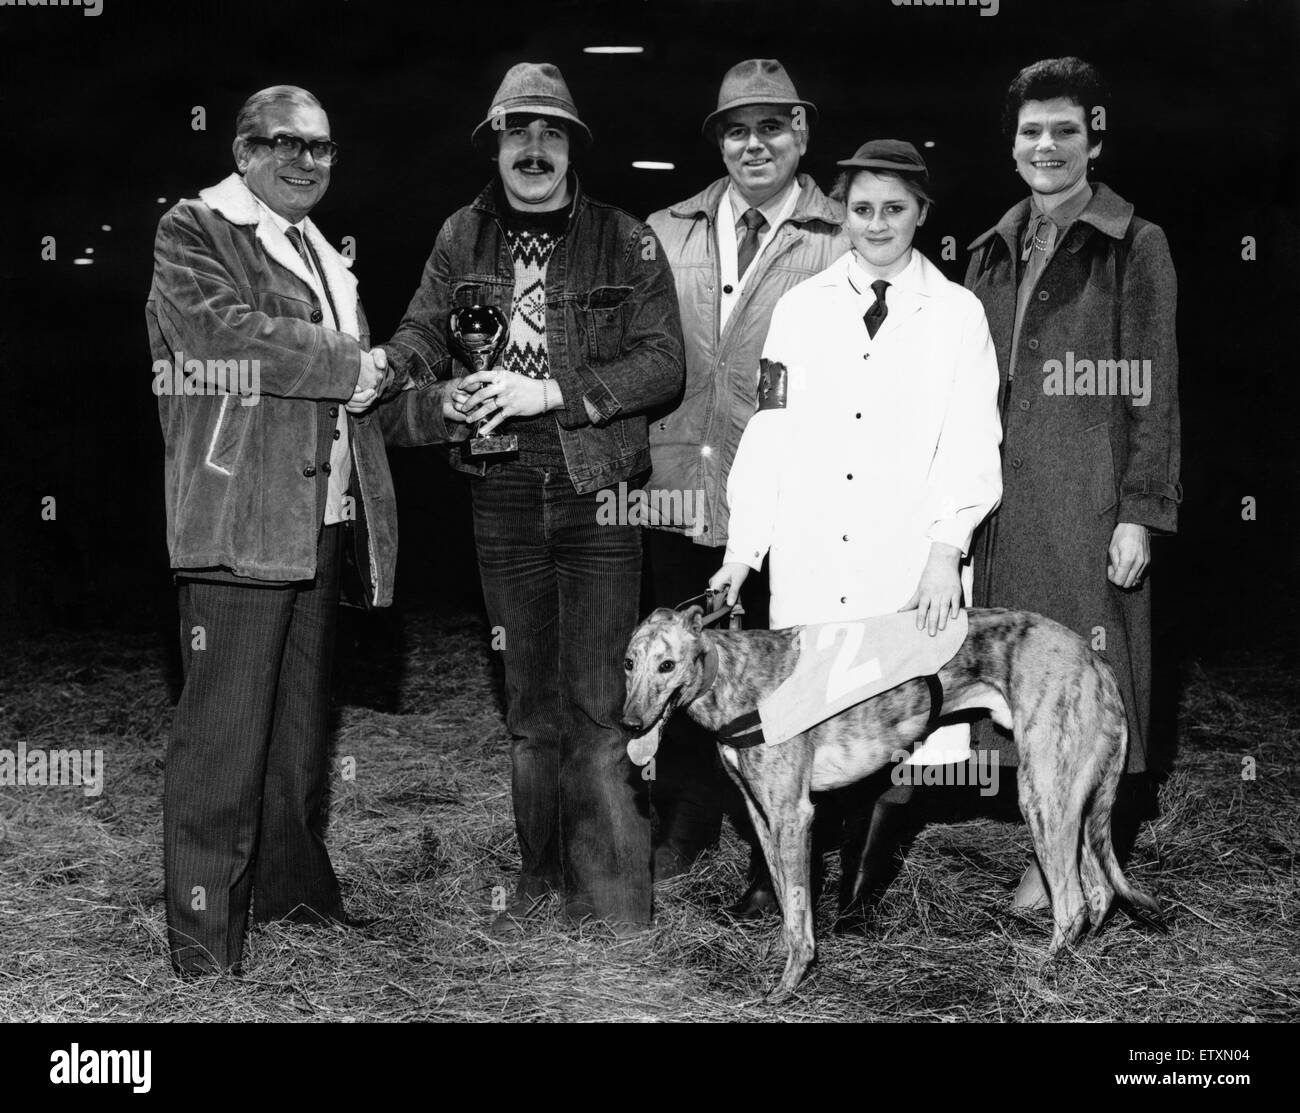 Cleveland Park Christmas Cup, (from left to right) Howard Piller, Kevin Wright, Jimmy Robinson, Miss Smith, Mrs Piller and winning dog 'Mr Solo'  at Cleveland Park Stadium in Middlesbrough. 2 January 1983 Stock Photo